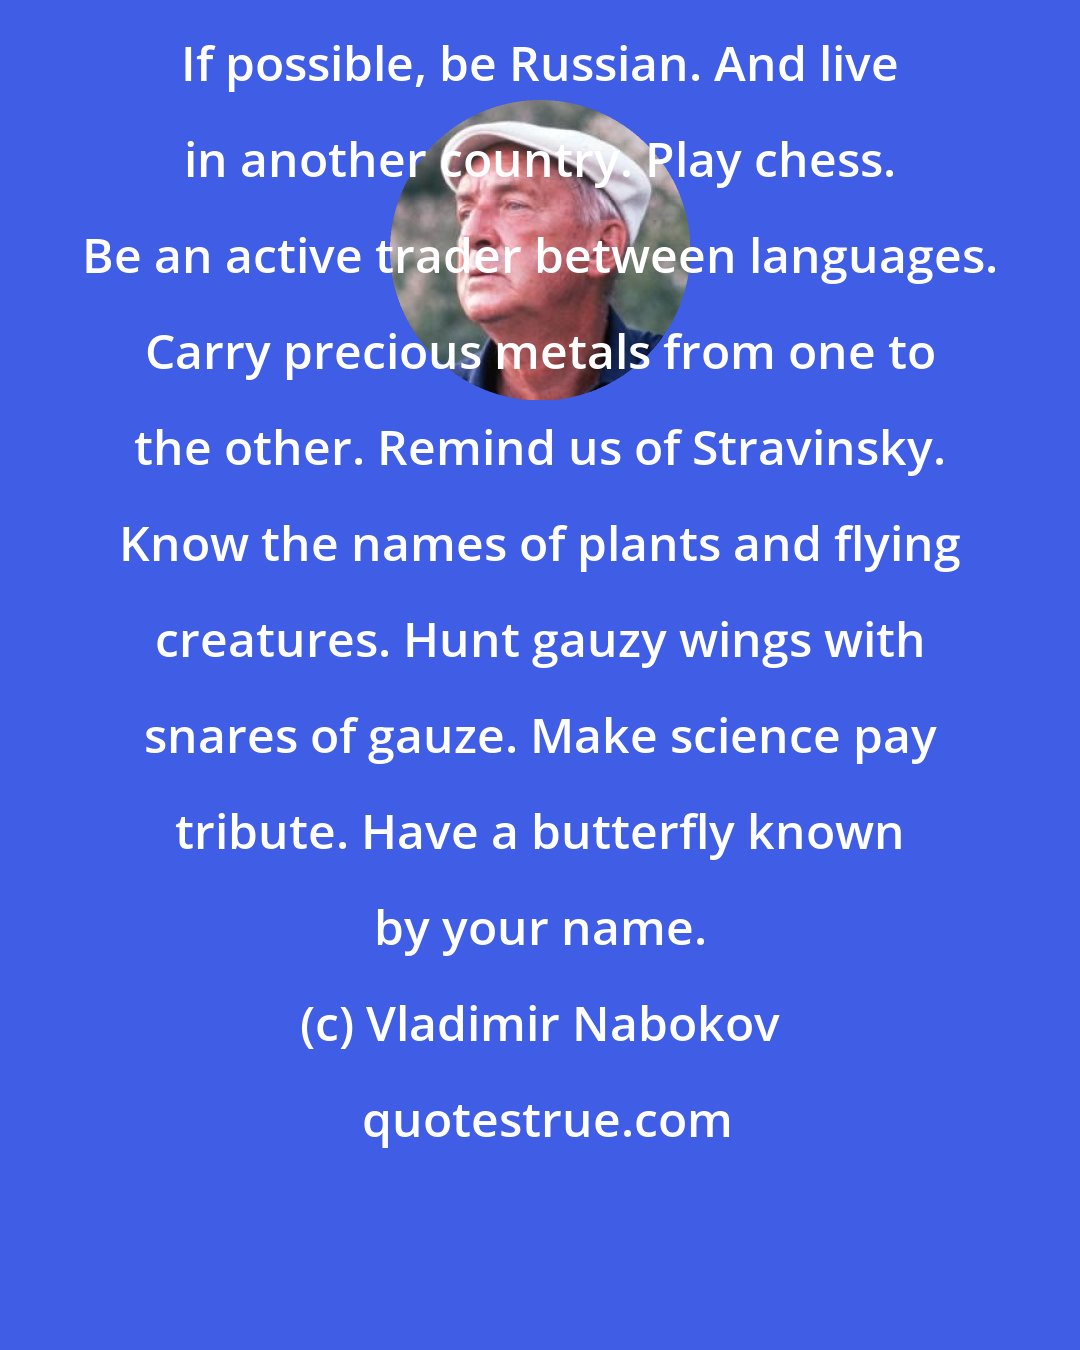 Vladimir Nabokov: If possible, be Russian. And live in another country. Play chess. Be an active trader between languages. Carry precious metals from one to the other. Remind us of Stravinsky. Know the names of plants and flying creatures. Hunt gauzy wings with snares of gauze. Make science pay tribute. Have a butterfly known by your name.